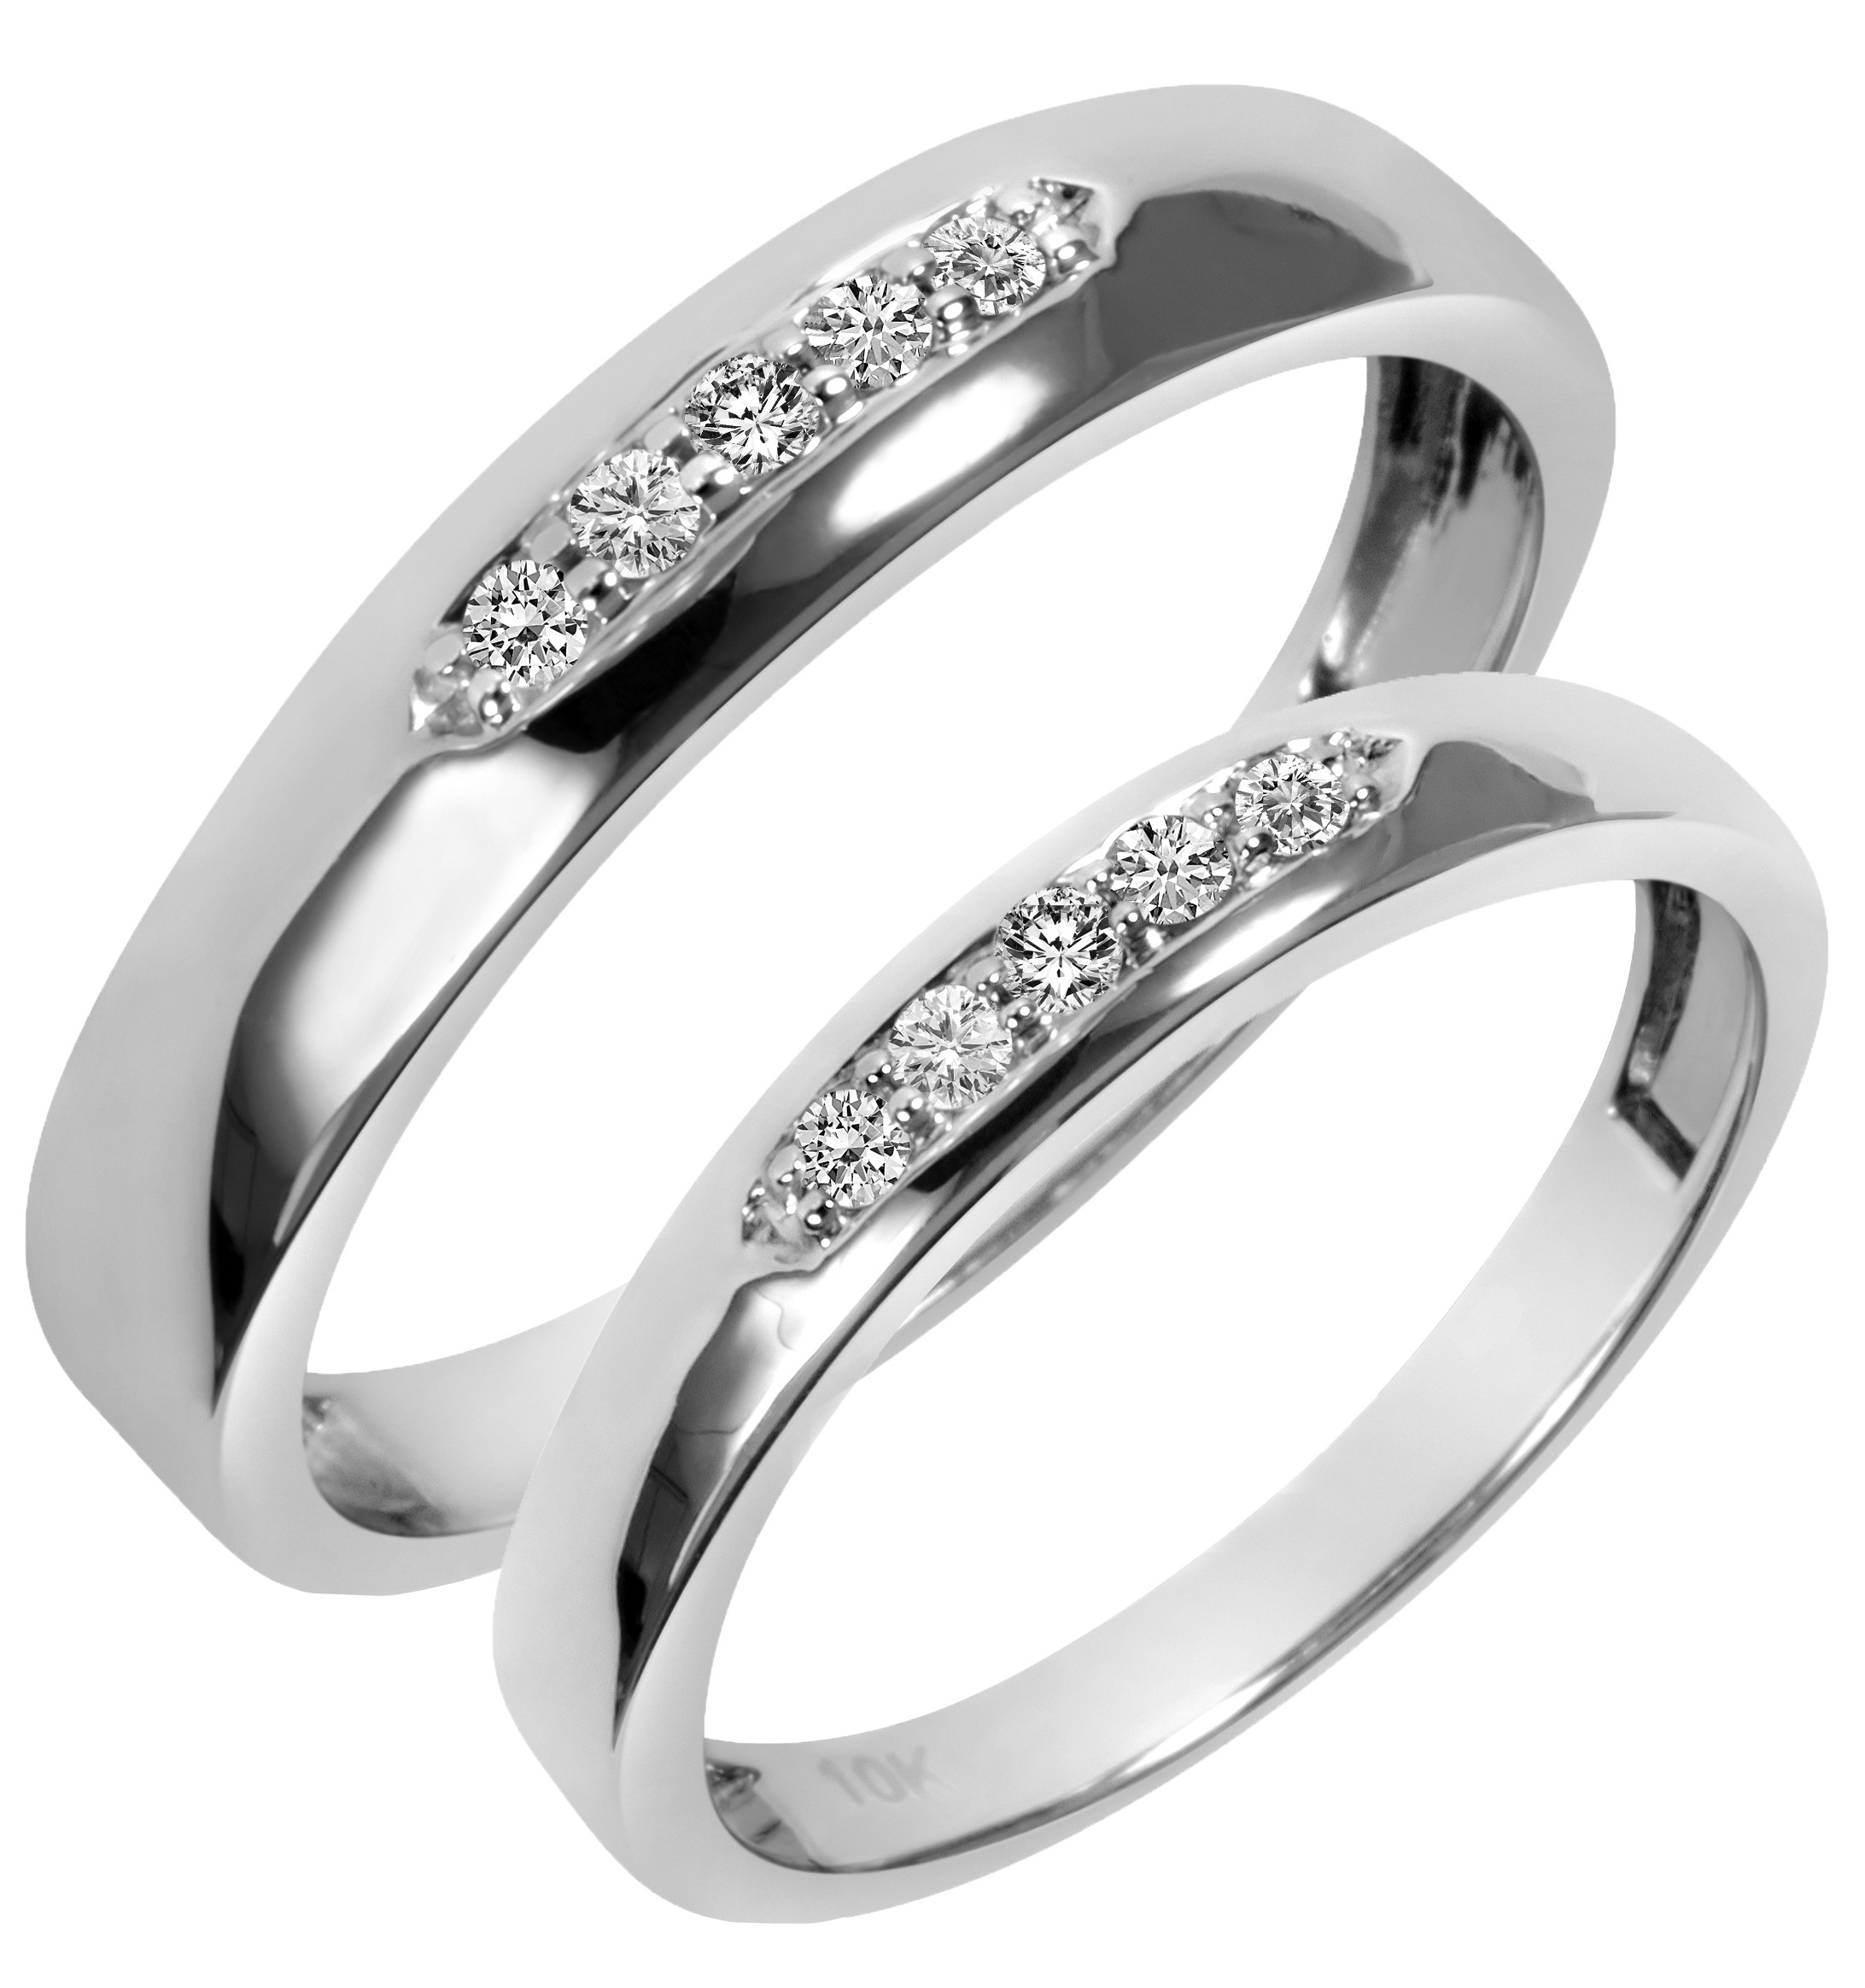 Wedding Band Sets His And Hers
 10K White Gold 1 5 CT T W